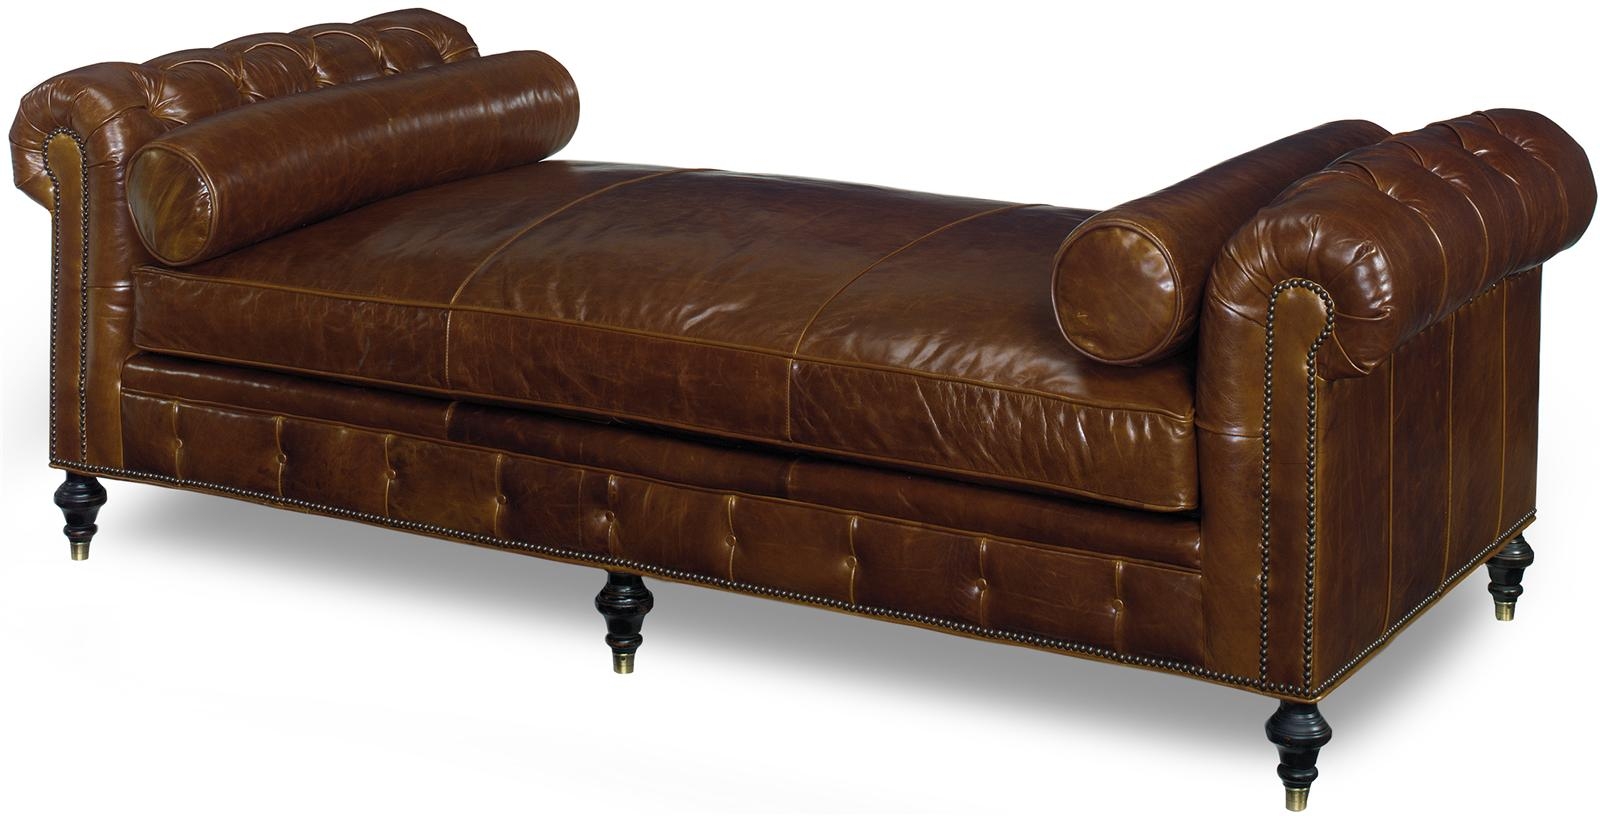 New Chesterfield Daybed Chaise Longue Couch Brown Leather Wood Hand ...